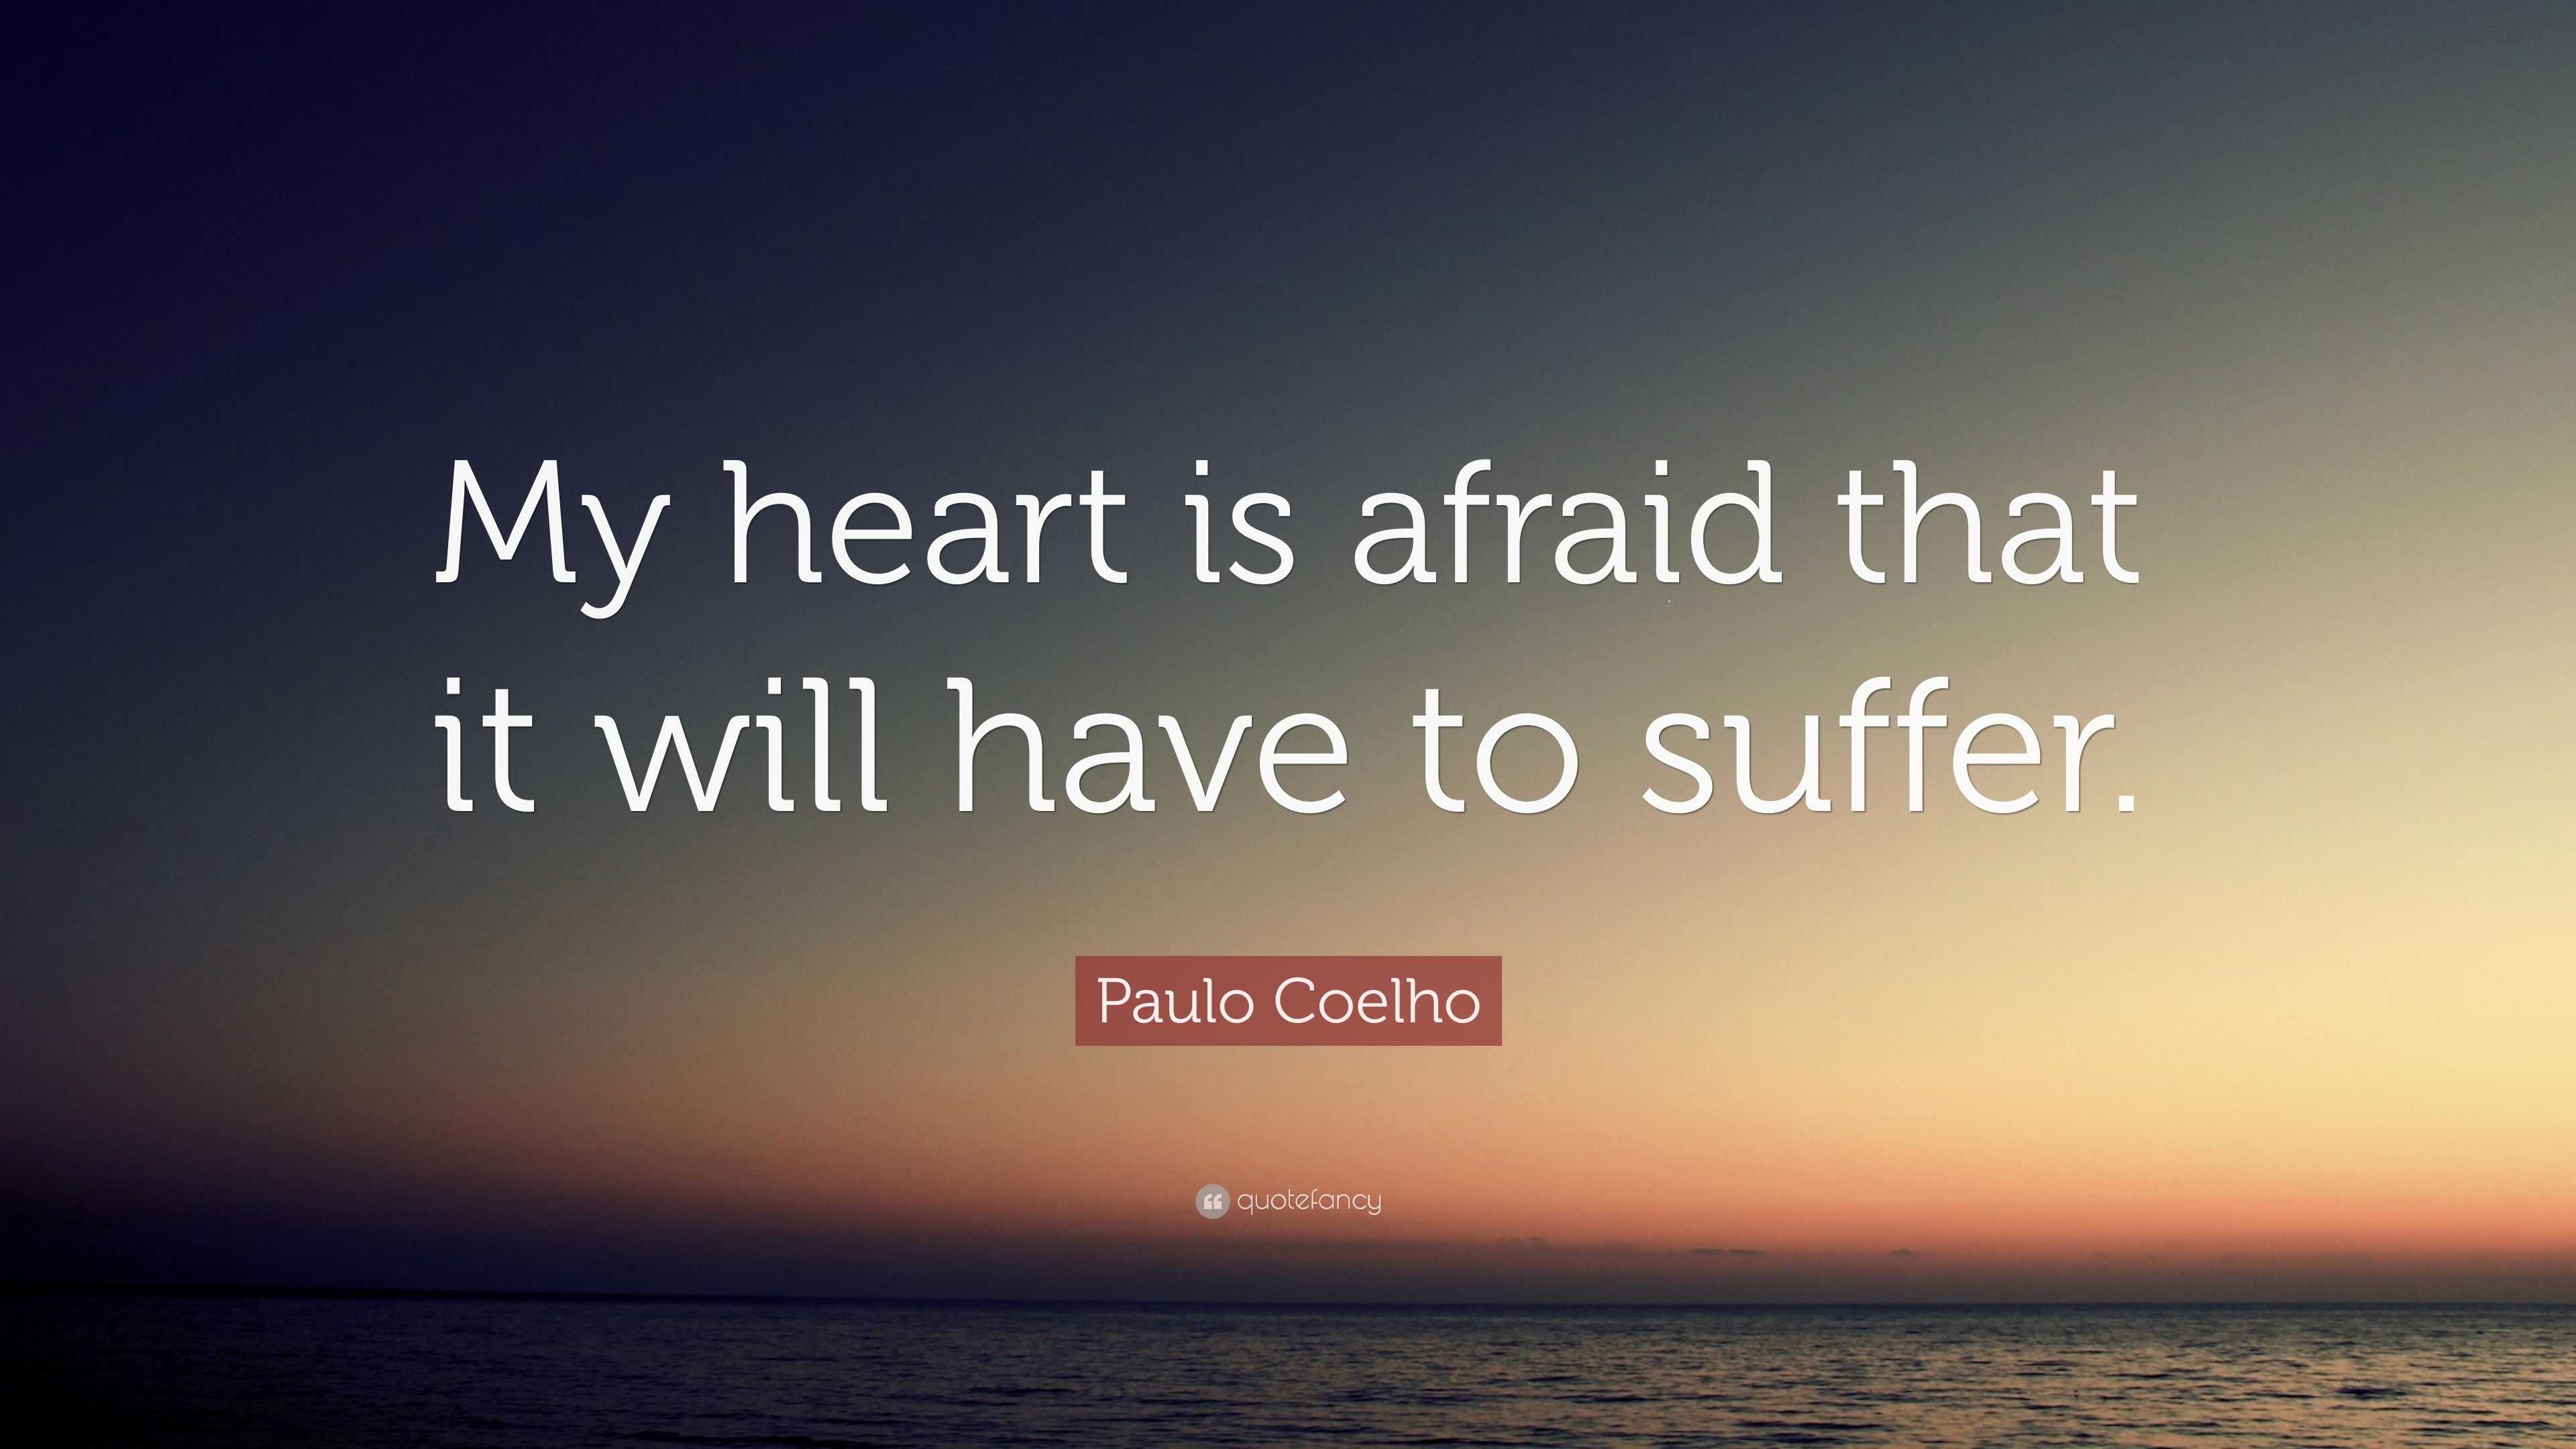 Paulo Coelho Quote: “My heart is afraid that it will have to suffer.”